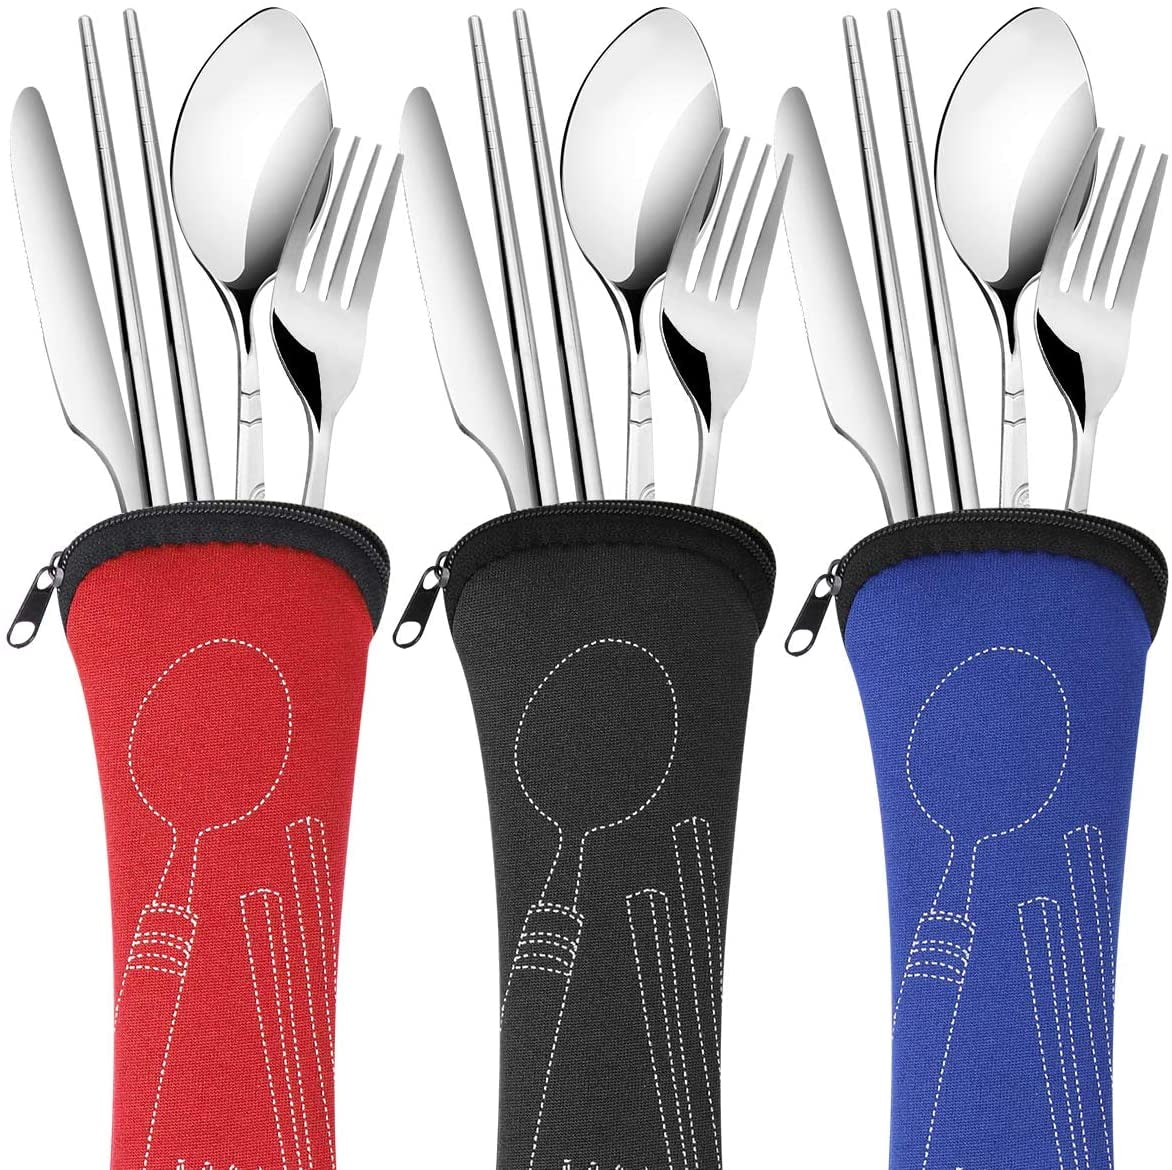 Ansukow 4-Piece Reusable Travel Utensils Set With Case, 18/8 Stainless  Steel Camping Silverware Set for Lunch Box, Dorm, Work, School, Picnic